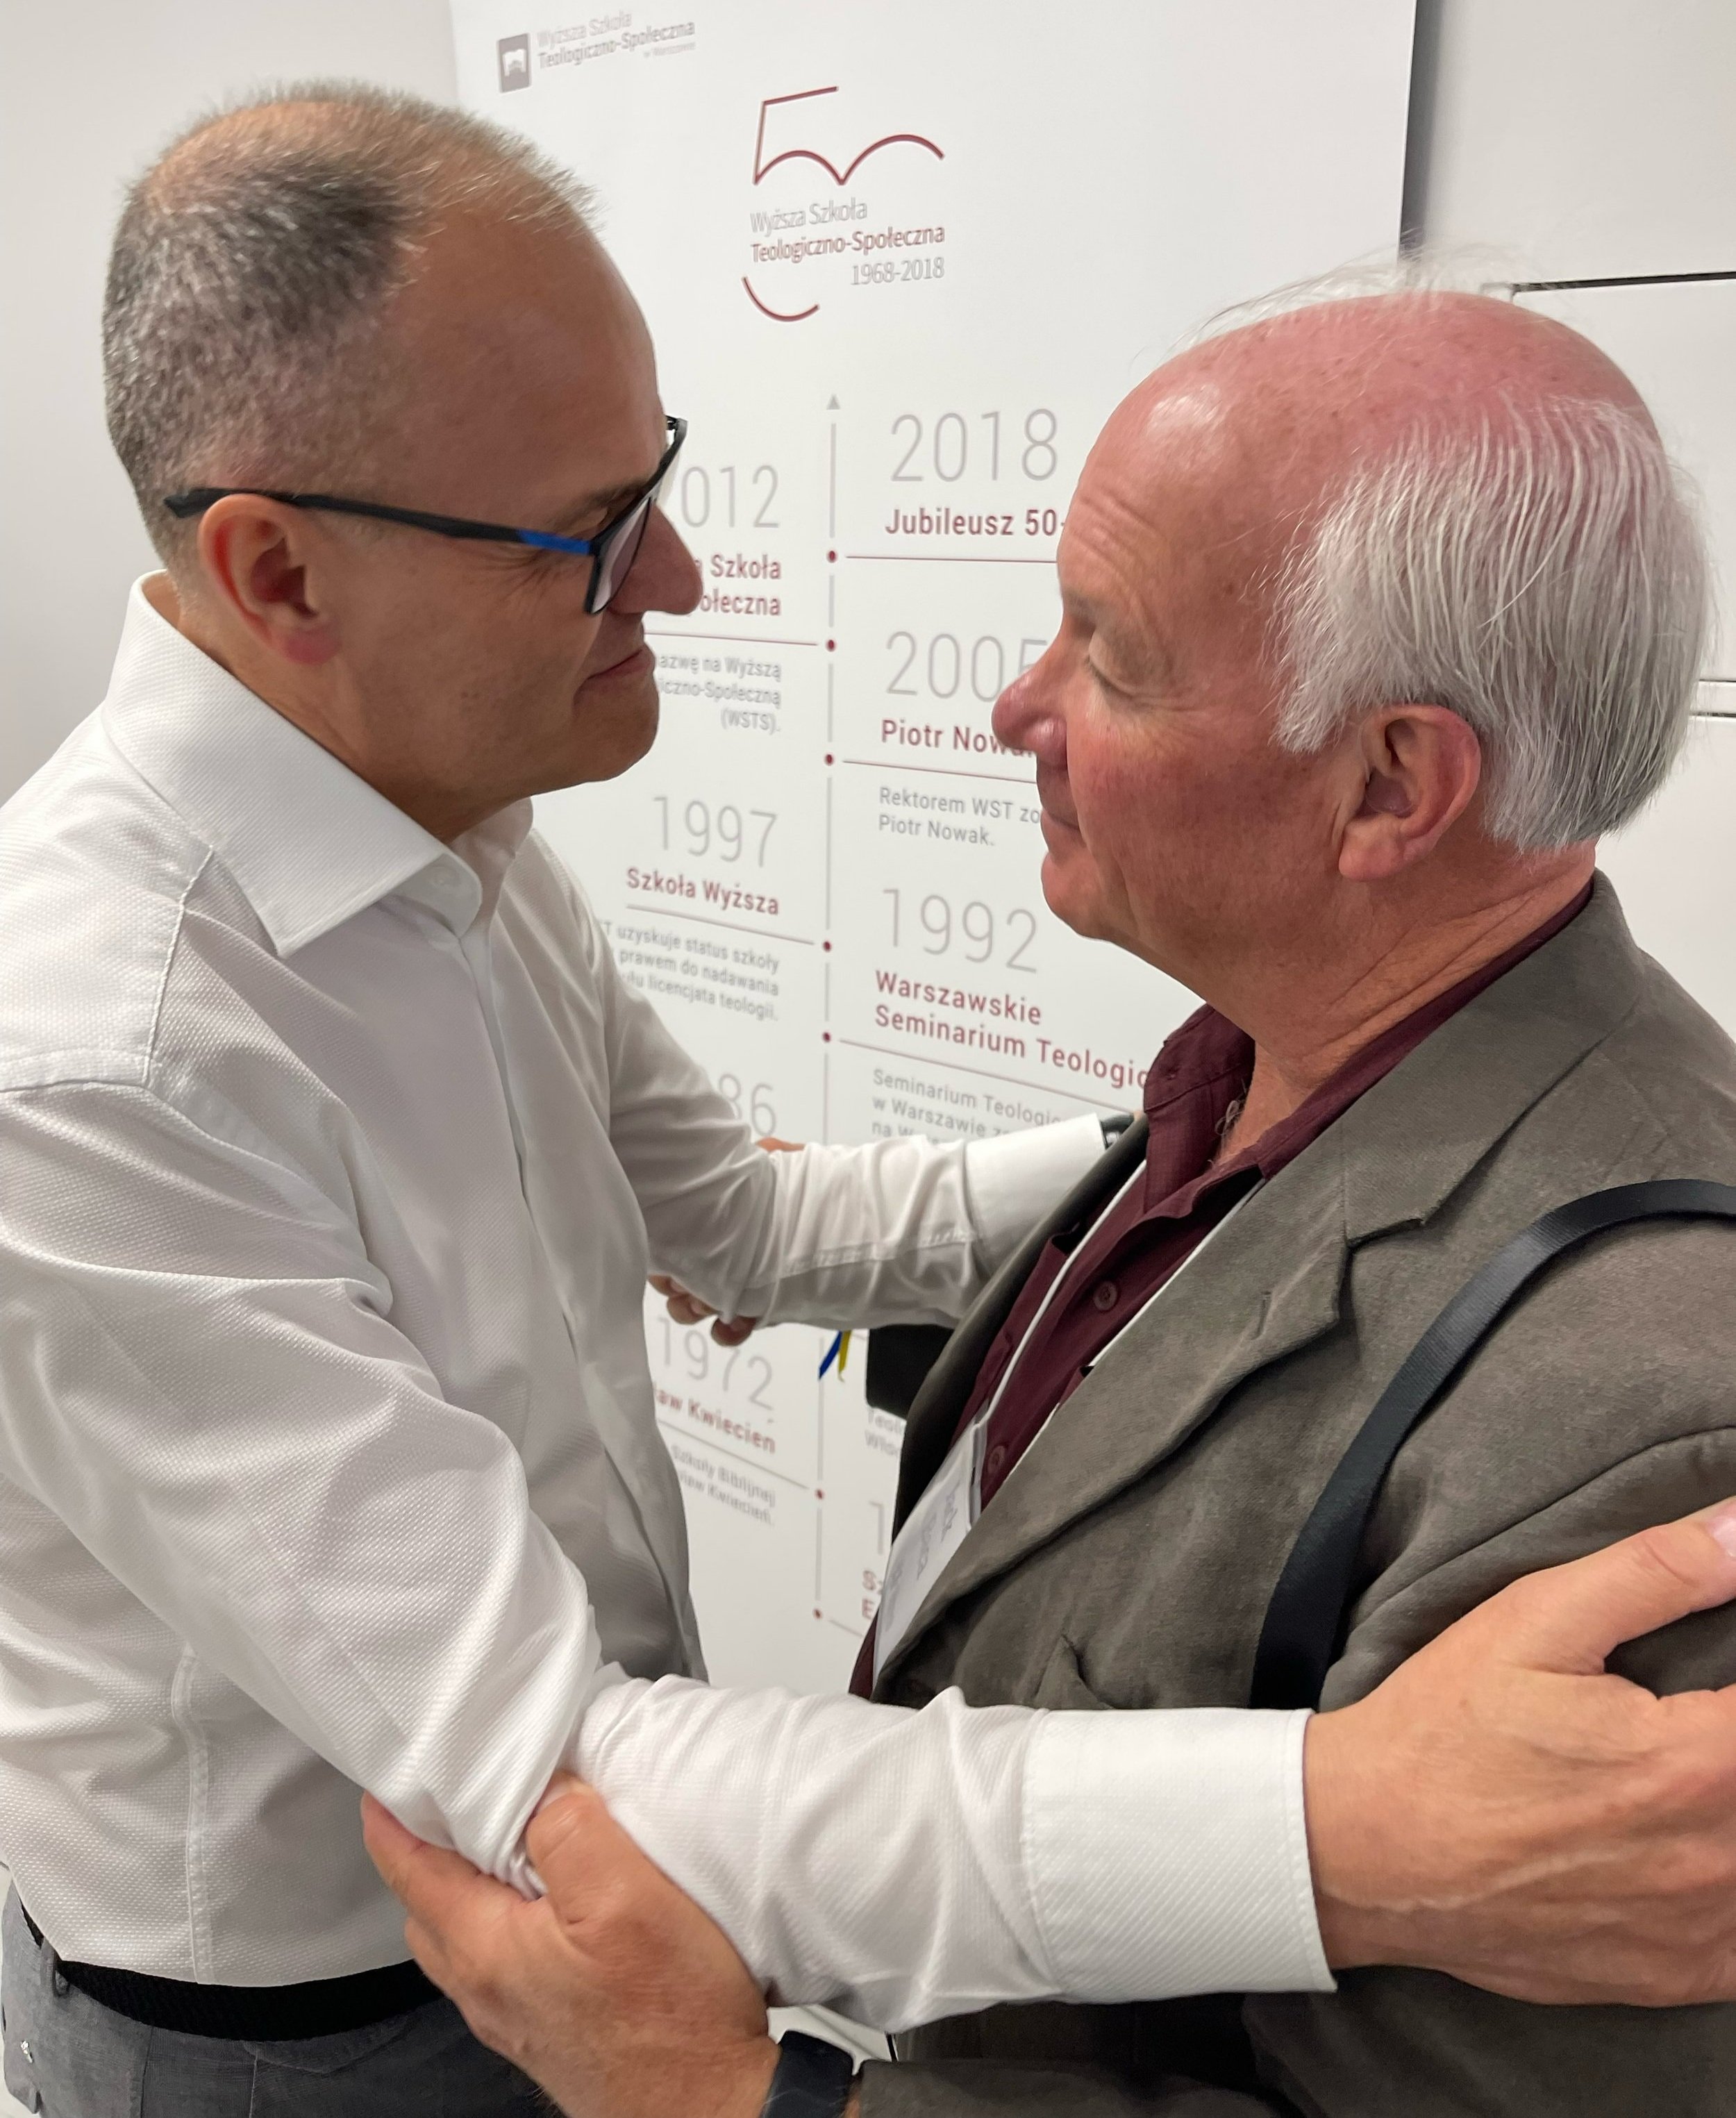   The Outreach Foundation board chair, Jack Baca, visits with Dr. Piotr Nowak, the president of the College of Theology and Social Sciences (Warsaw, Poland)  